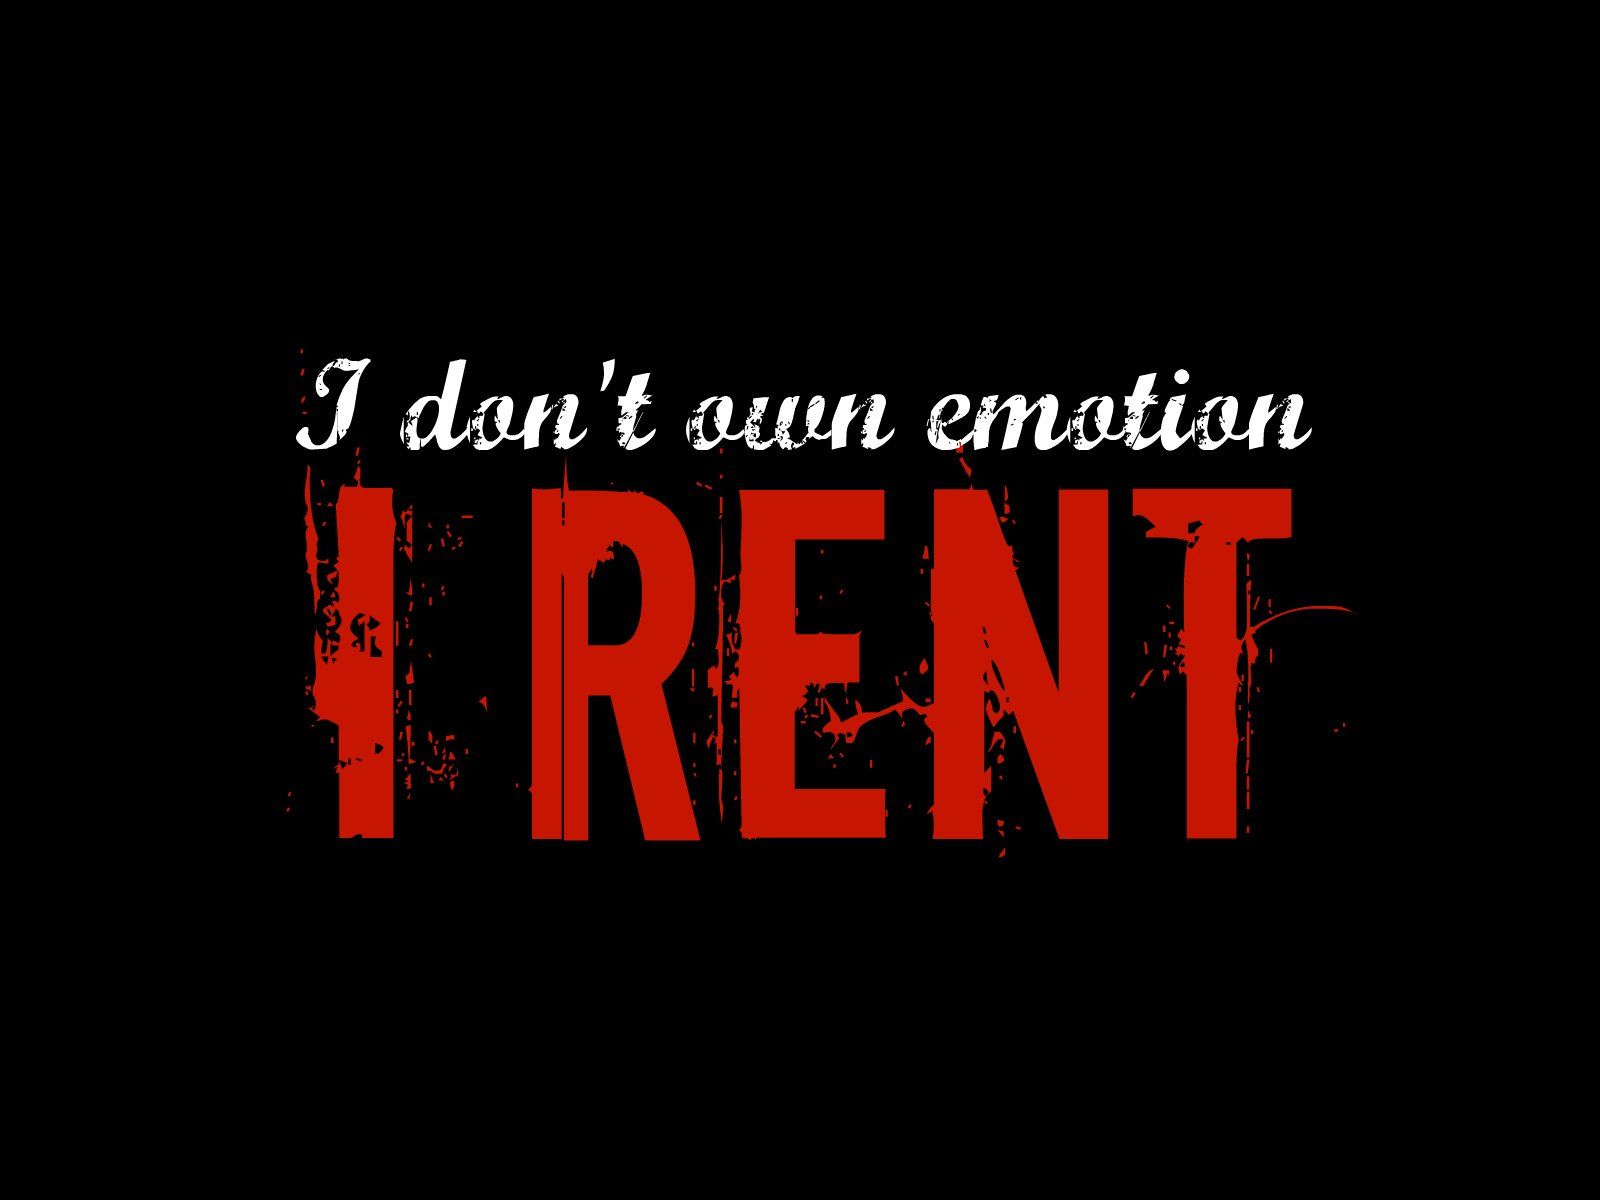 Rent the Musical're what you own So I own not a